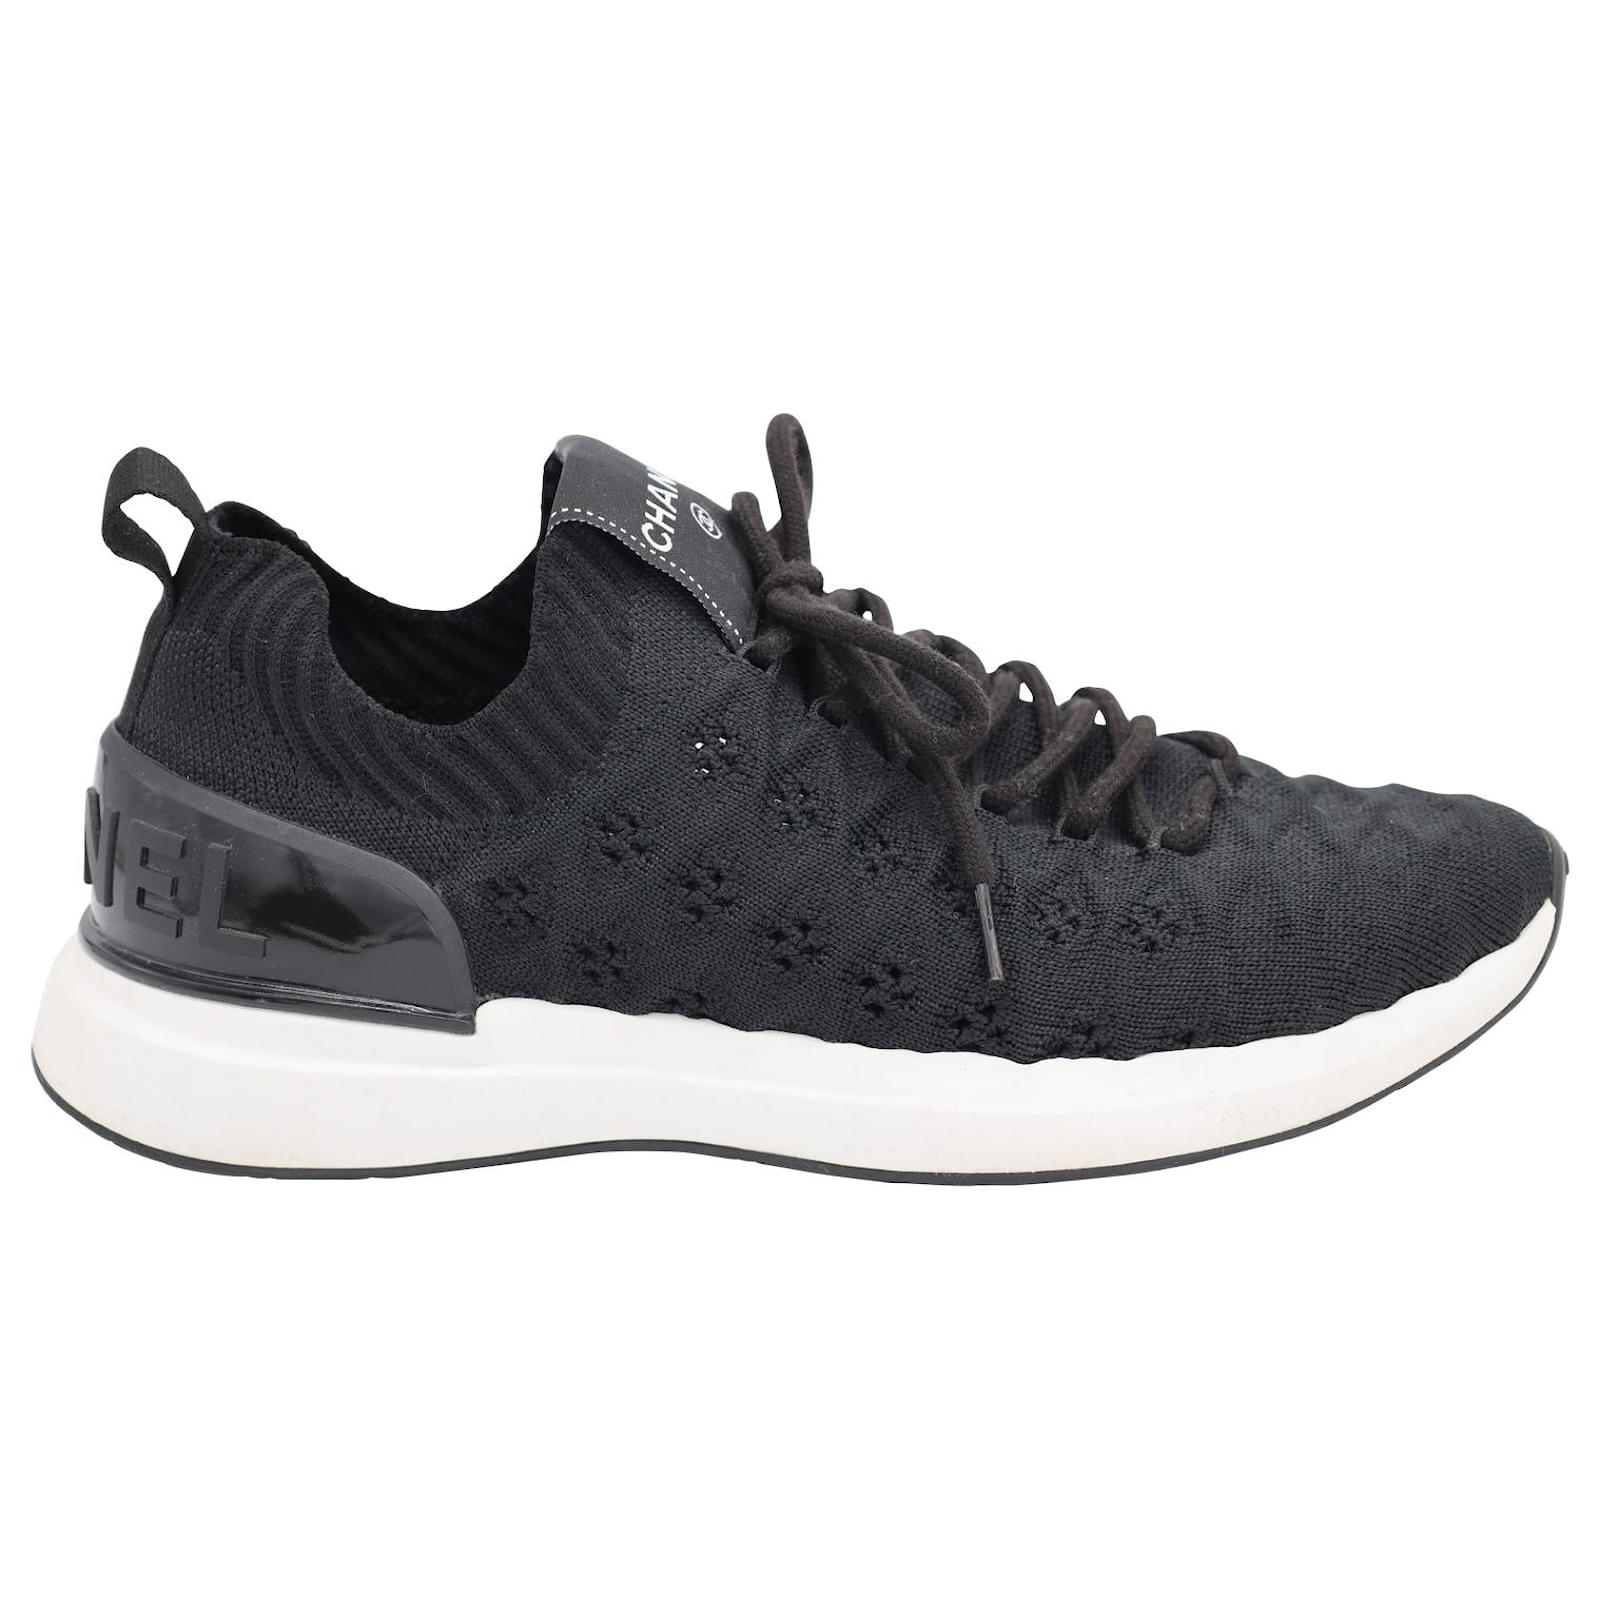 Levi's Mens Oats 2 Vegan Synthetic Leather Casual Trainer Sneaker Shoe :  Target